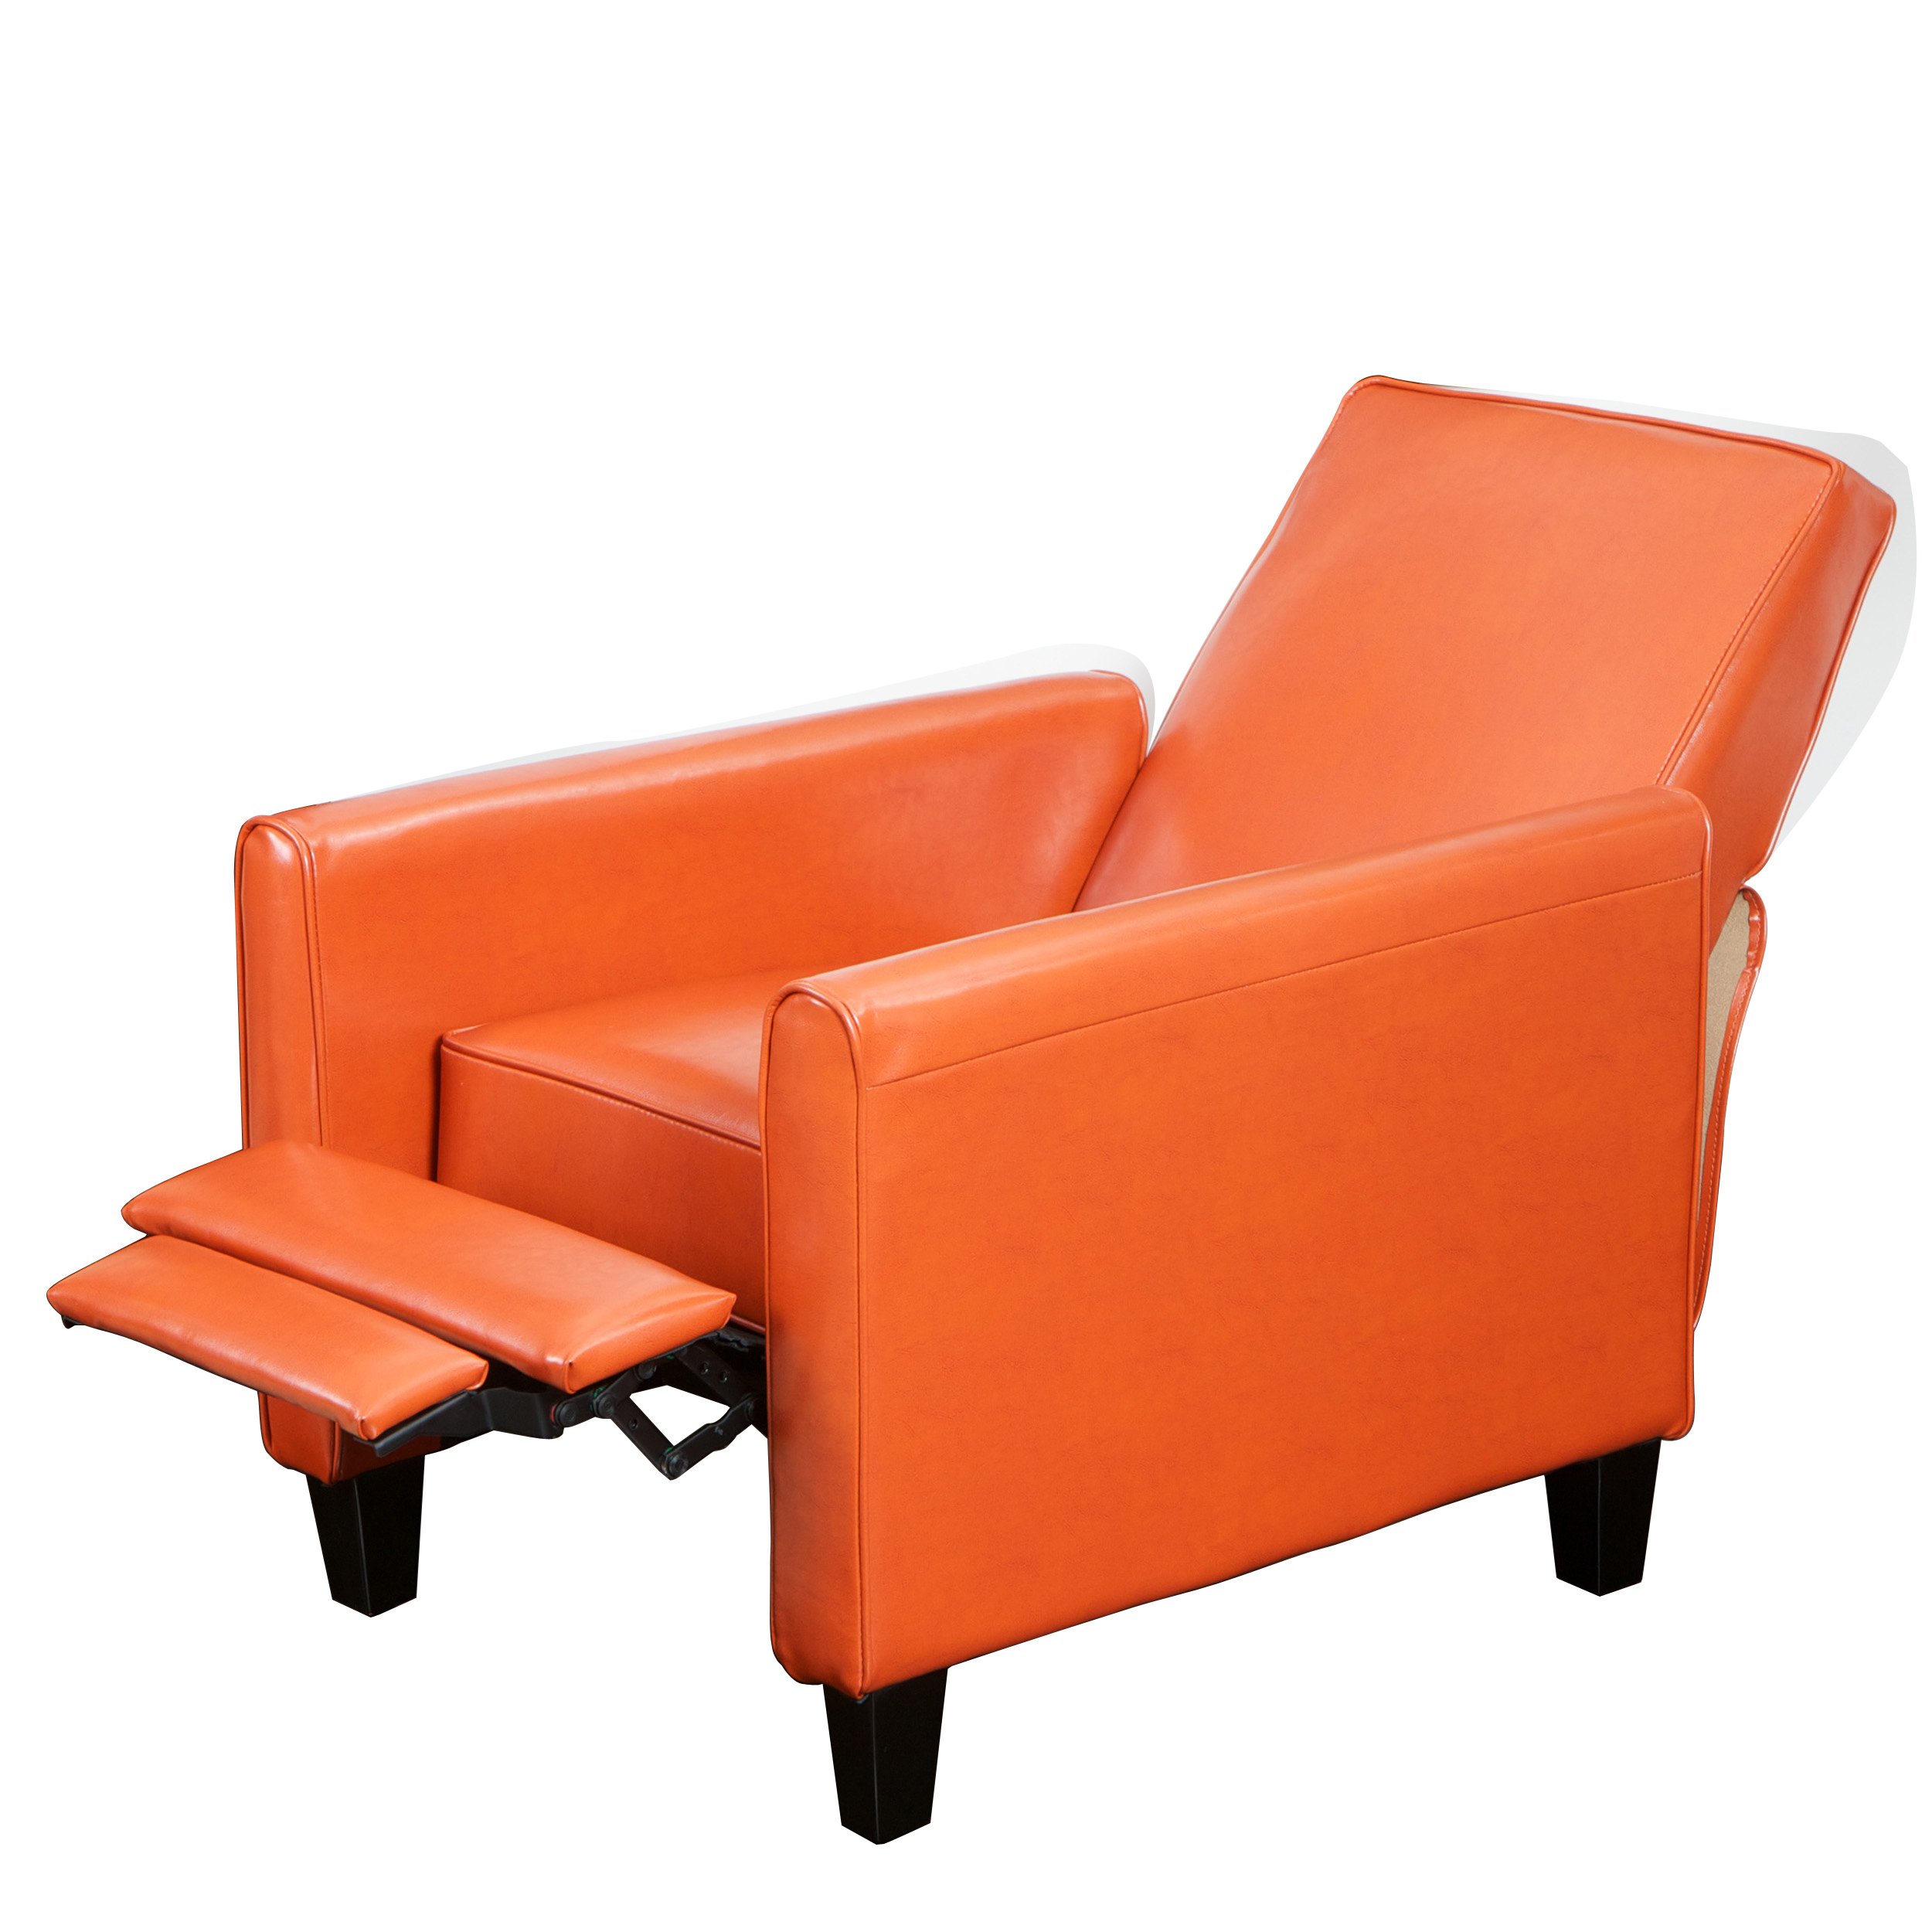 Davis Recliner Club Chair is Comfort in Small Spaces